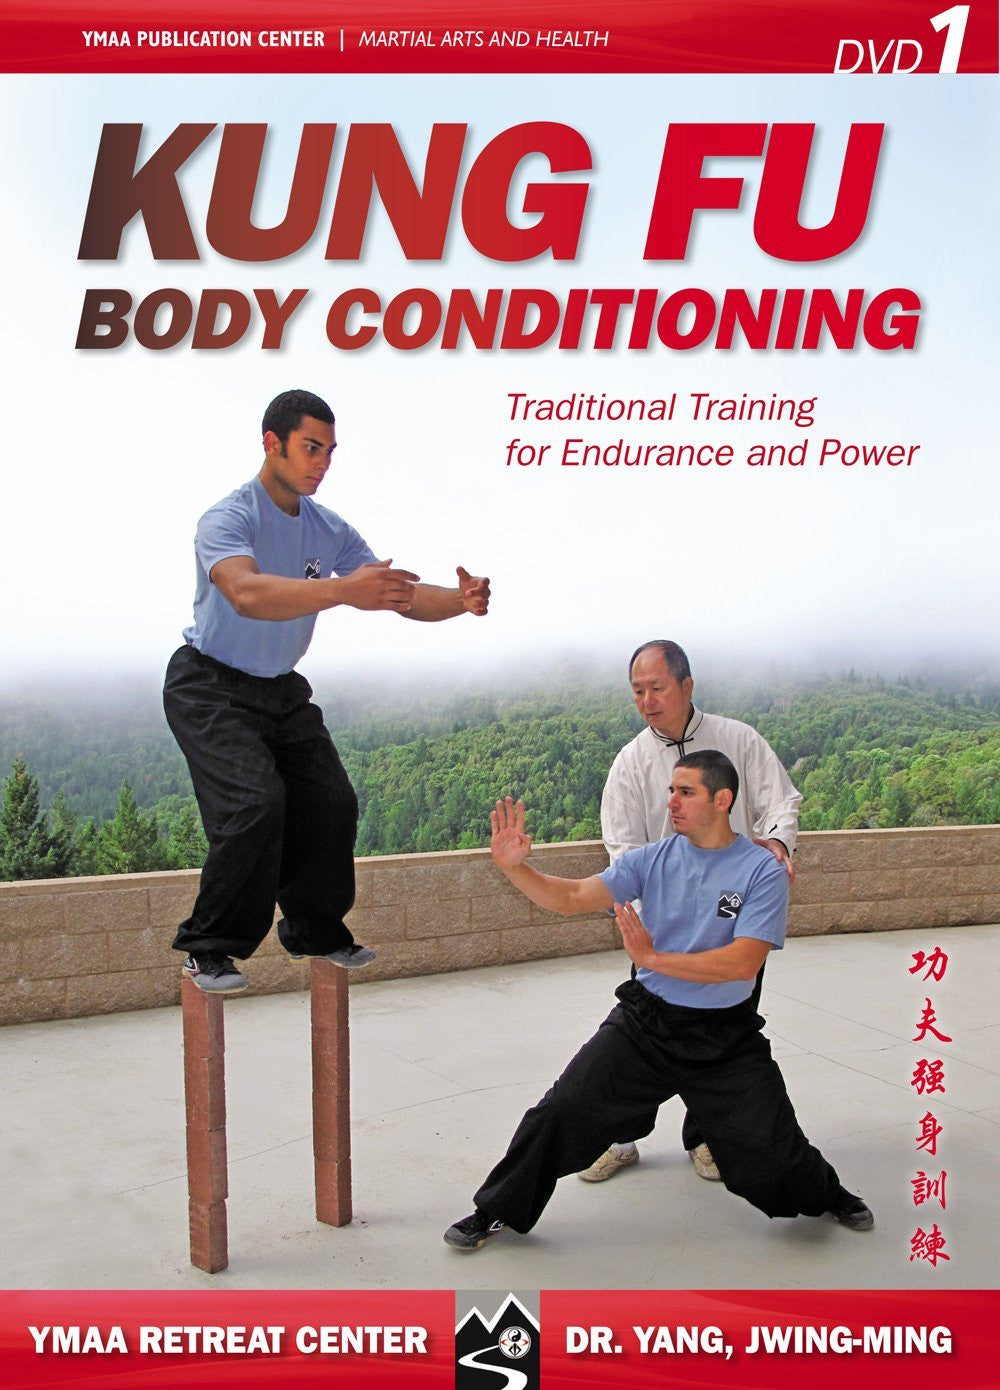 Kung Fu Body Conditioning DVD with Dr Yang, Jwing- Ming - Budovideos Inc